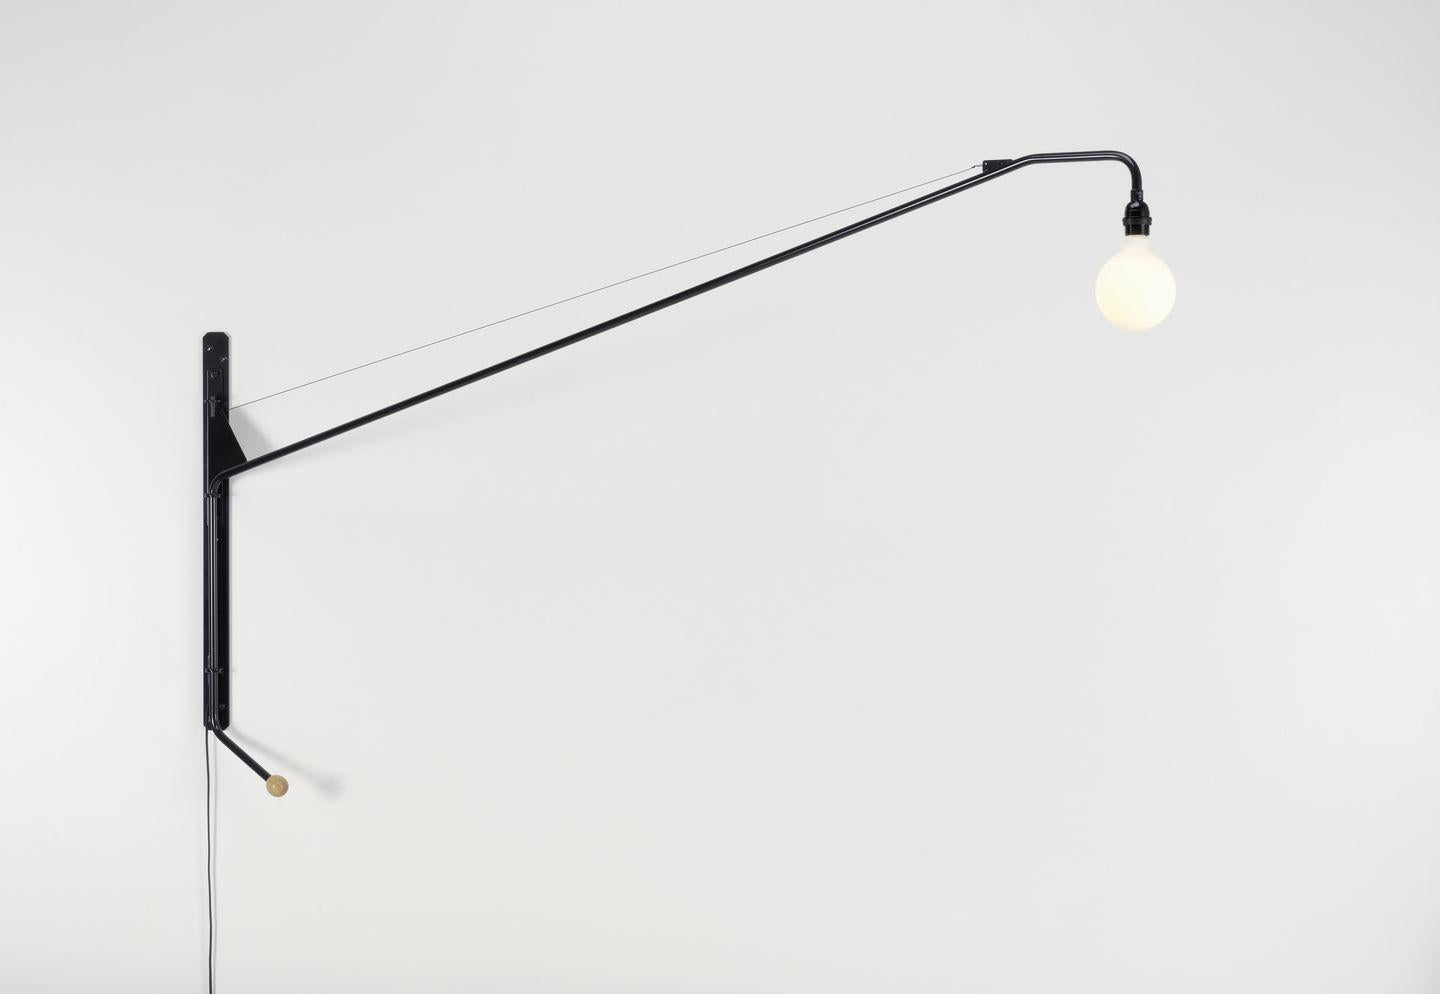 Designed as a pivoting wall lamp for the ‚Maison Tropique‘, Potence is regarded as one of Jean Prouve´‘s puristic masterpieces. The fascination of this luminaire, which is over two metres long and dimmable, stems from the spareness of its materials